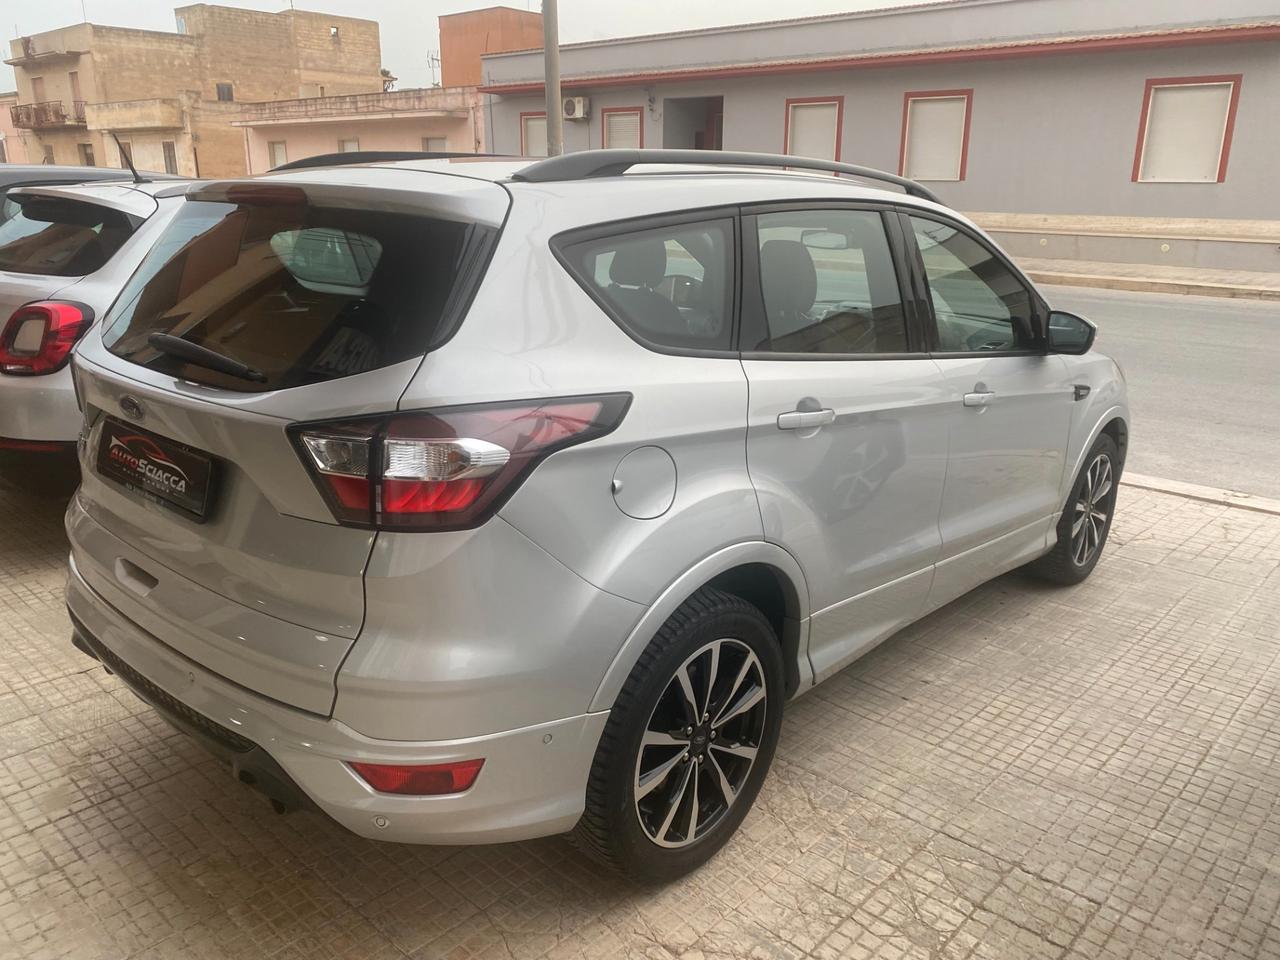 Ford Kuga 2.0 TDCI 120 CV S&S 2WD ST-Line